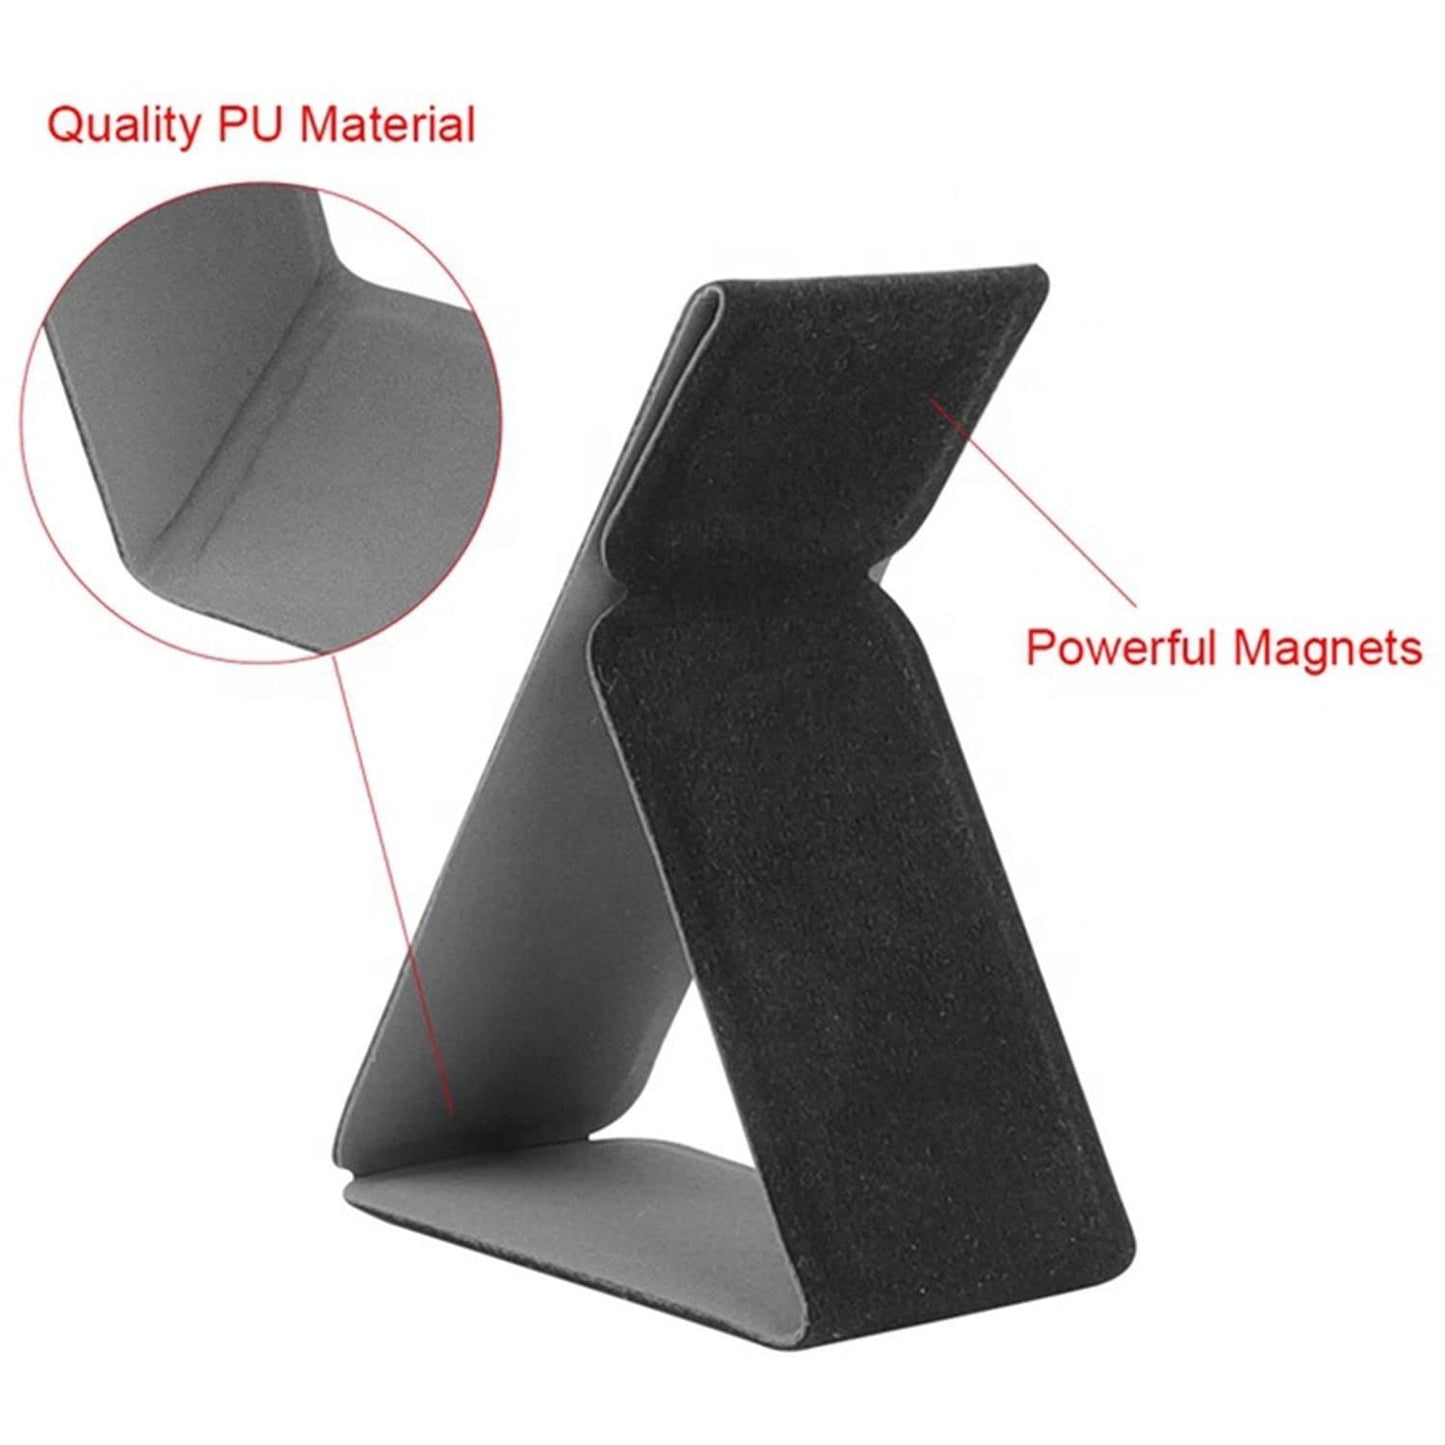 TecheiTulip Phone Finger Grip Holder Telescopic Foldable Leather Strap Brackets Universal Kickstand for Smartphone and Tablets Viewing Angles Stand Magnetic Stick Holder Horizontal and Vertical Mount